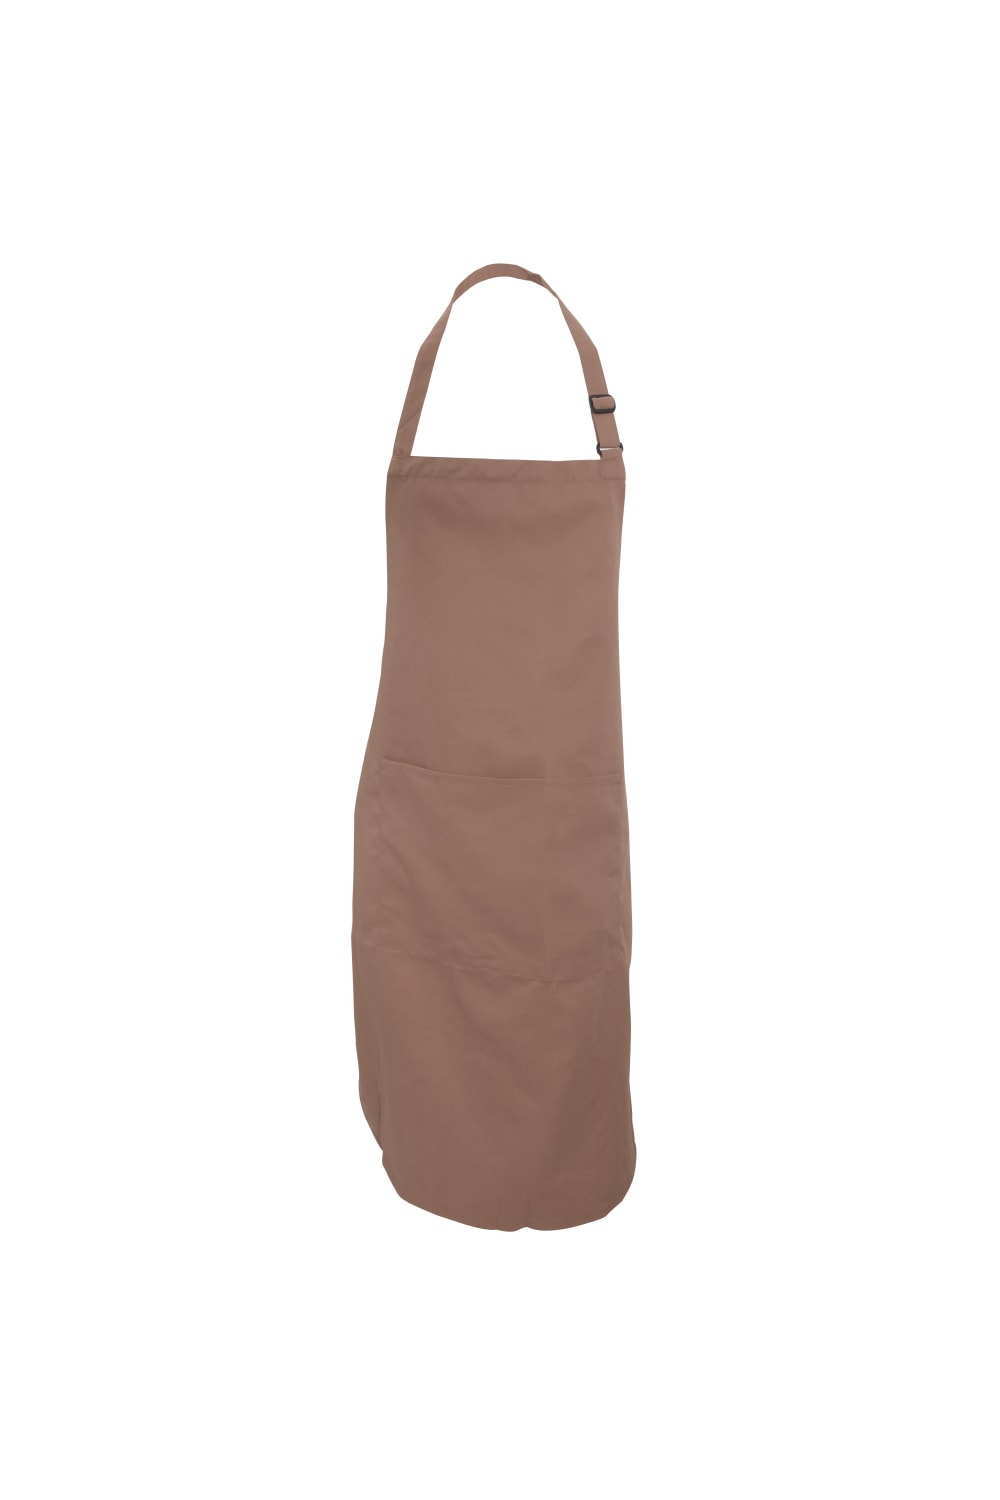 Dennys Adults Unisex Catering Bib Apron With Pocket (Biscuit) (One Size) (One Size)